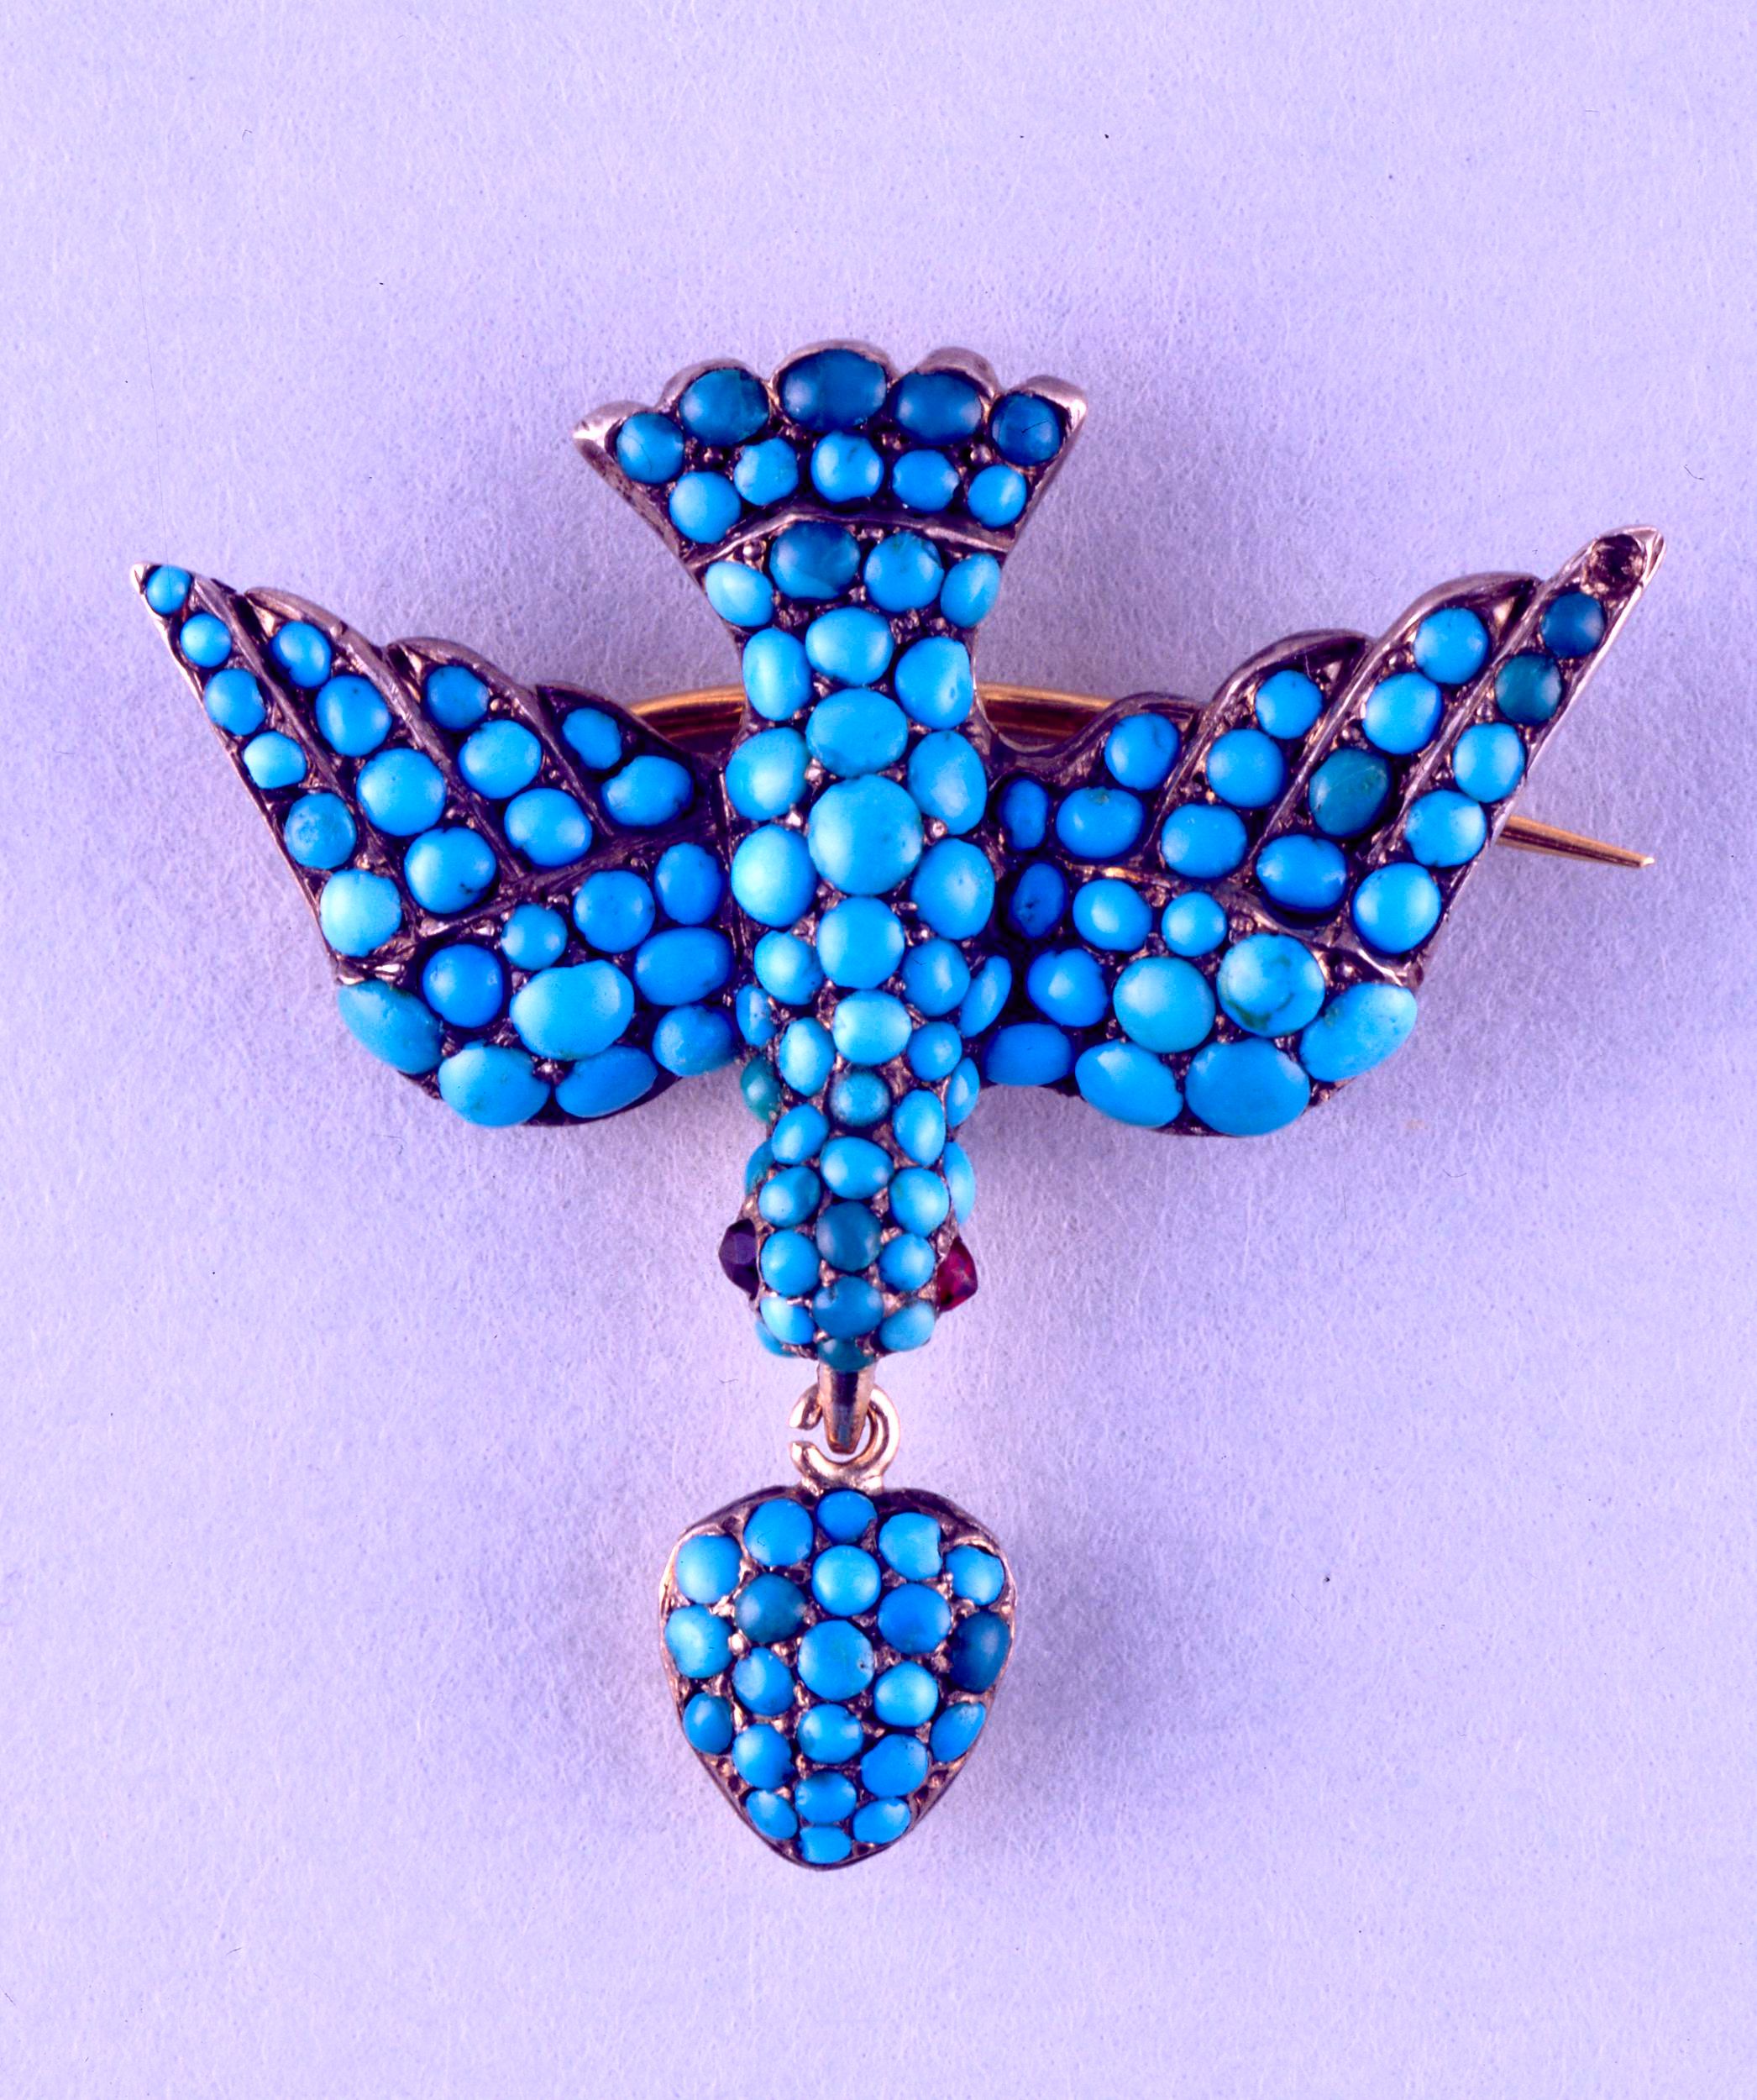 Silver brooch, with a gold backing and pavé-set with turquoises, in the form of a dove with ruby eyes and a pendant heart.